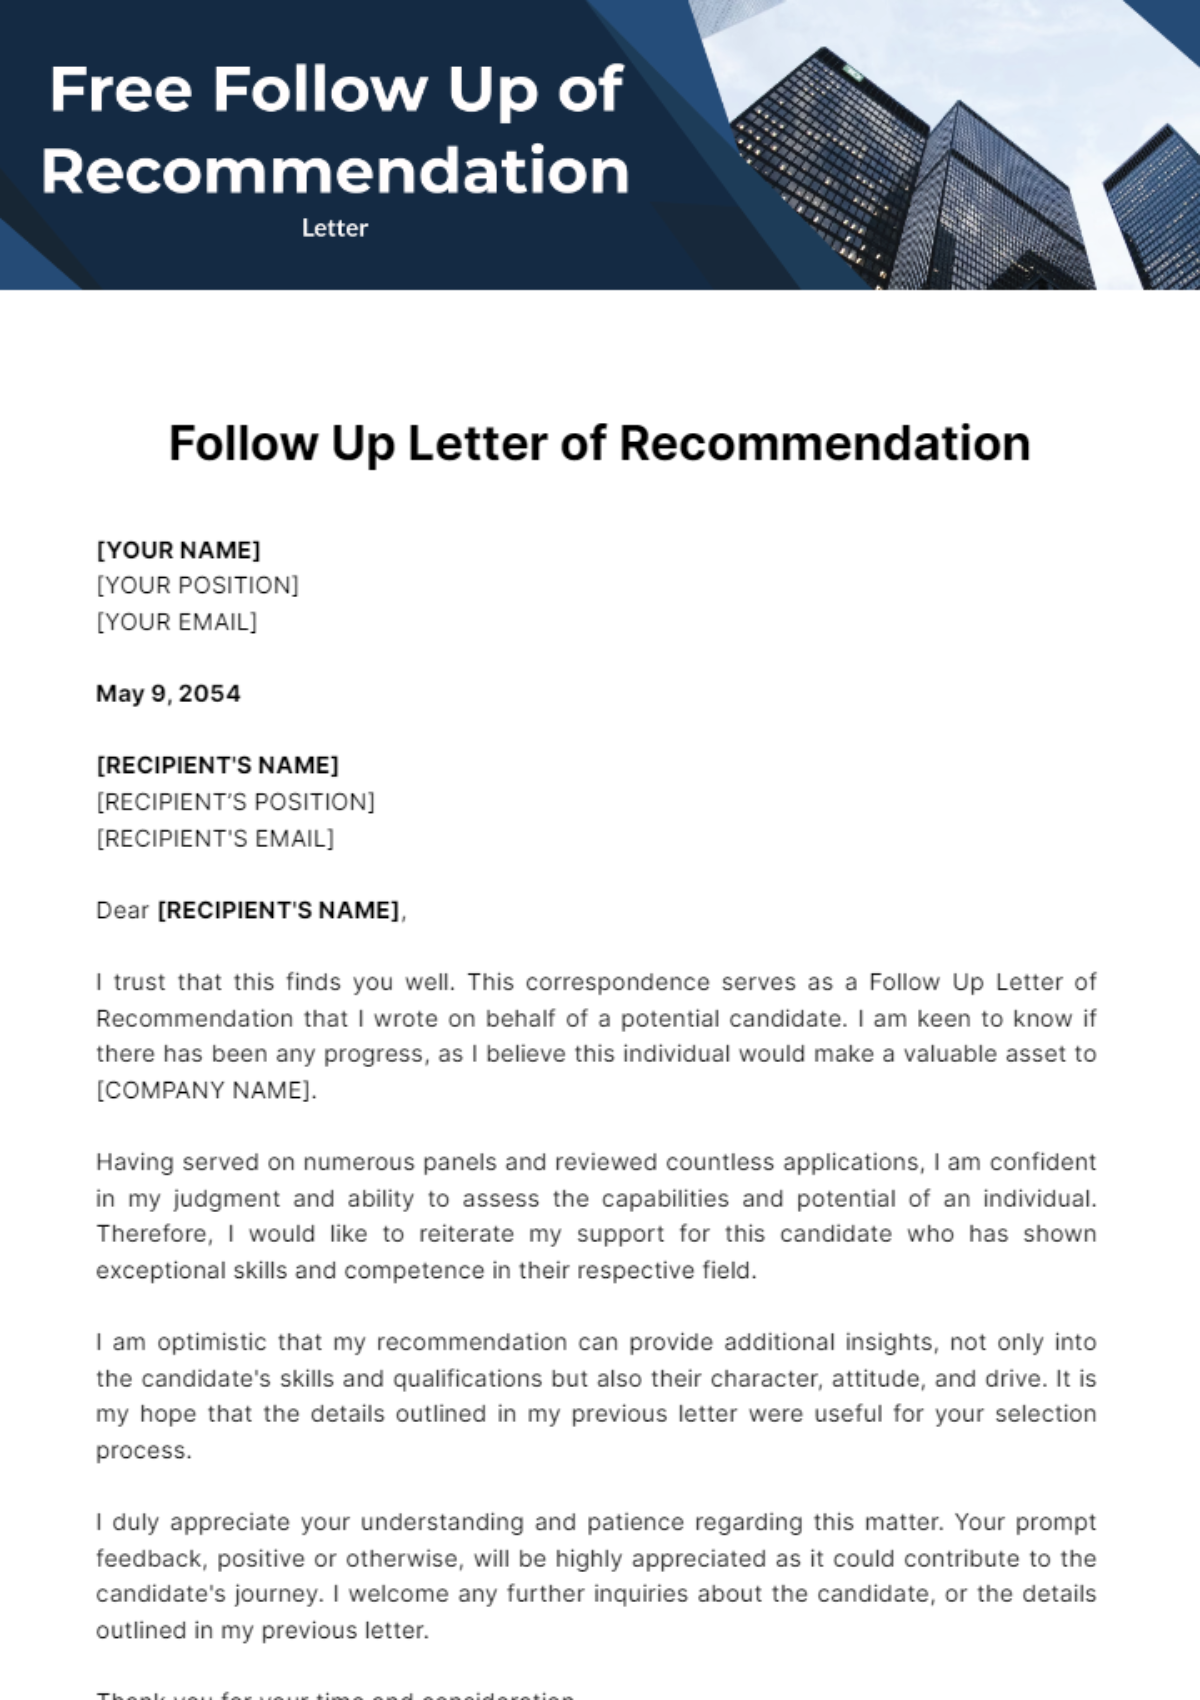 Free Follow Up Letter of Recommendation Template